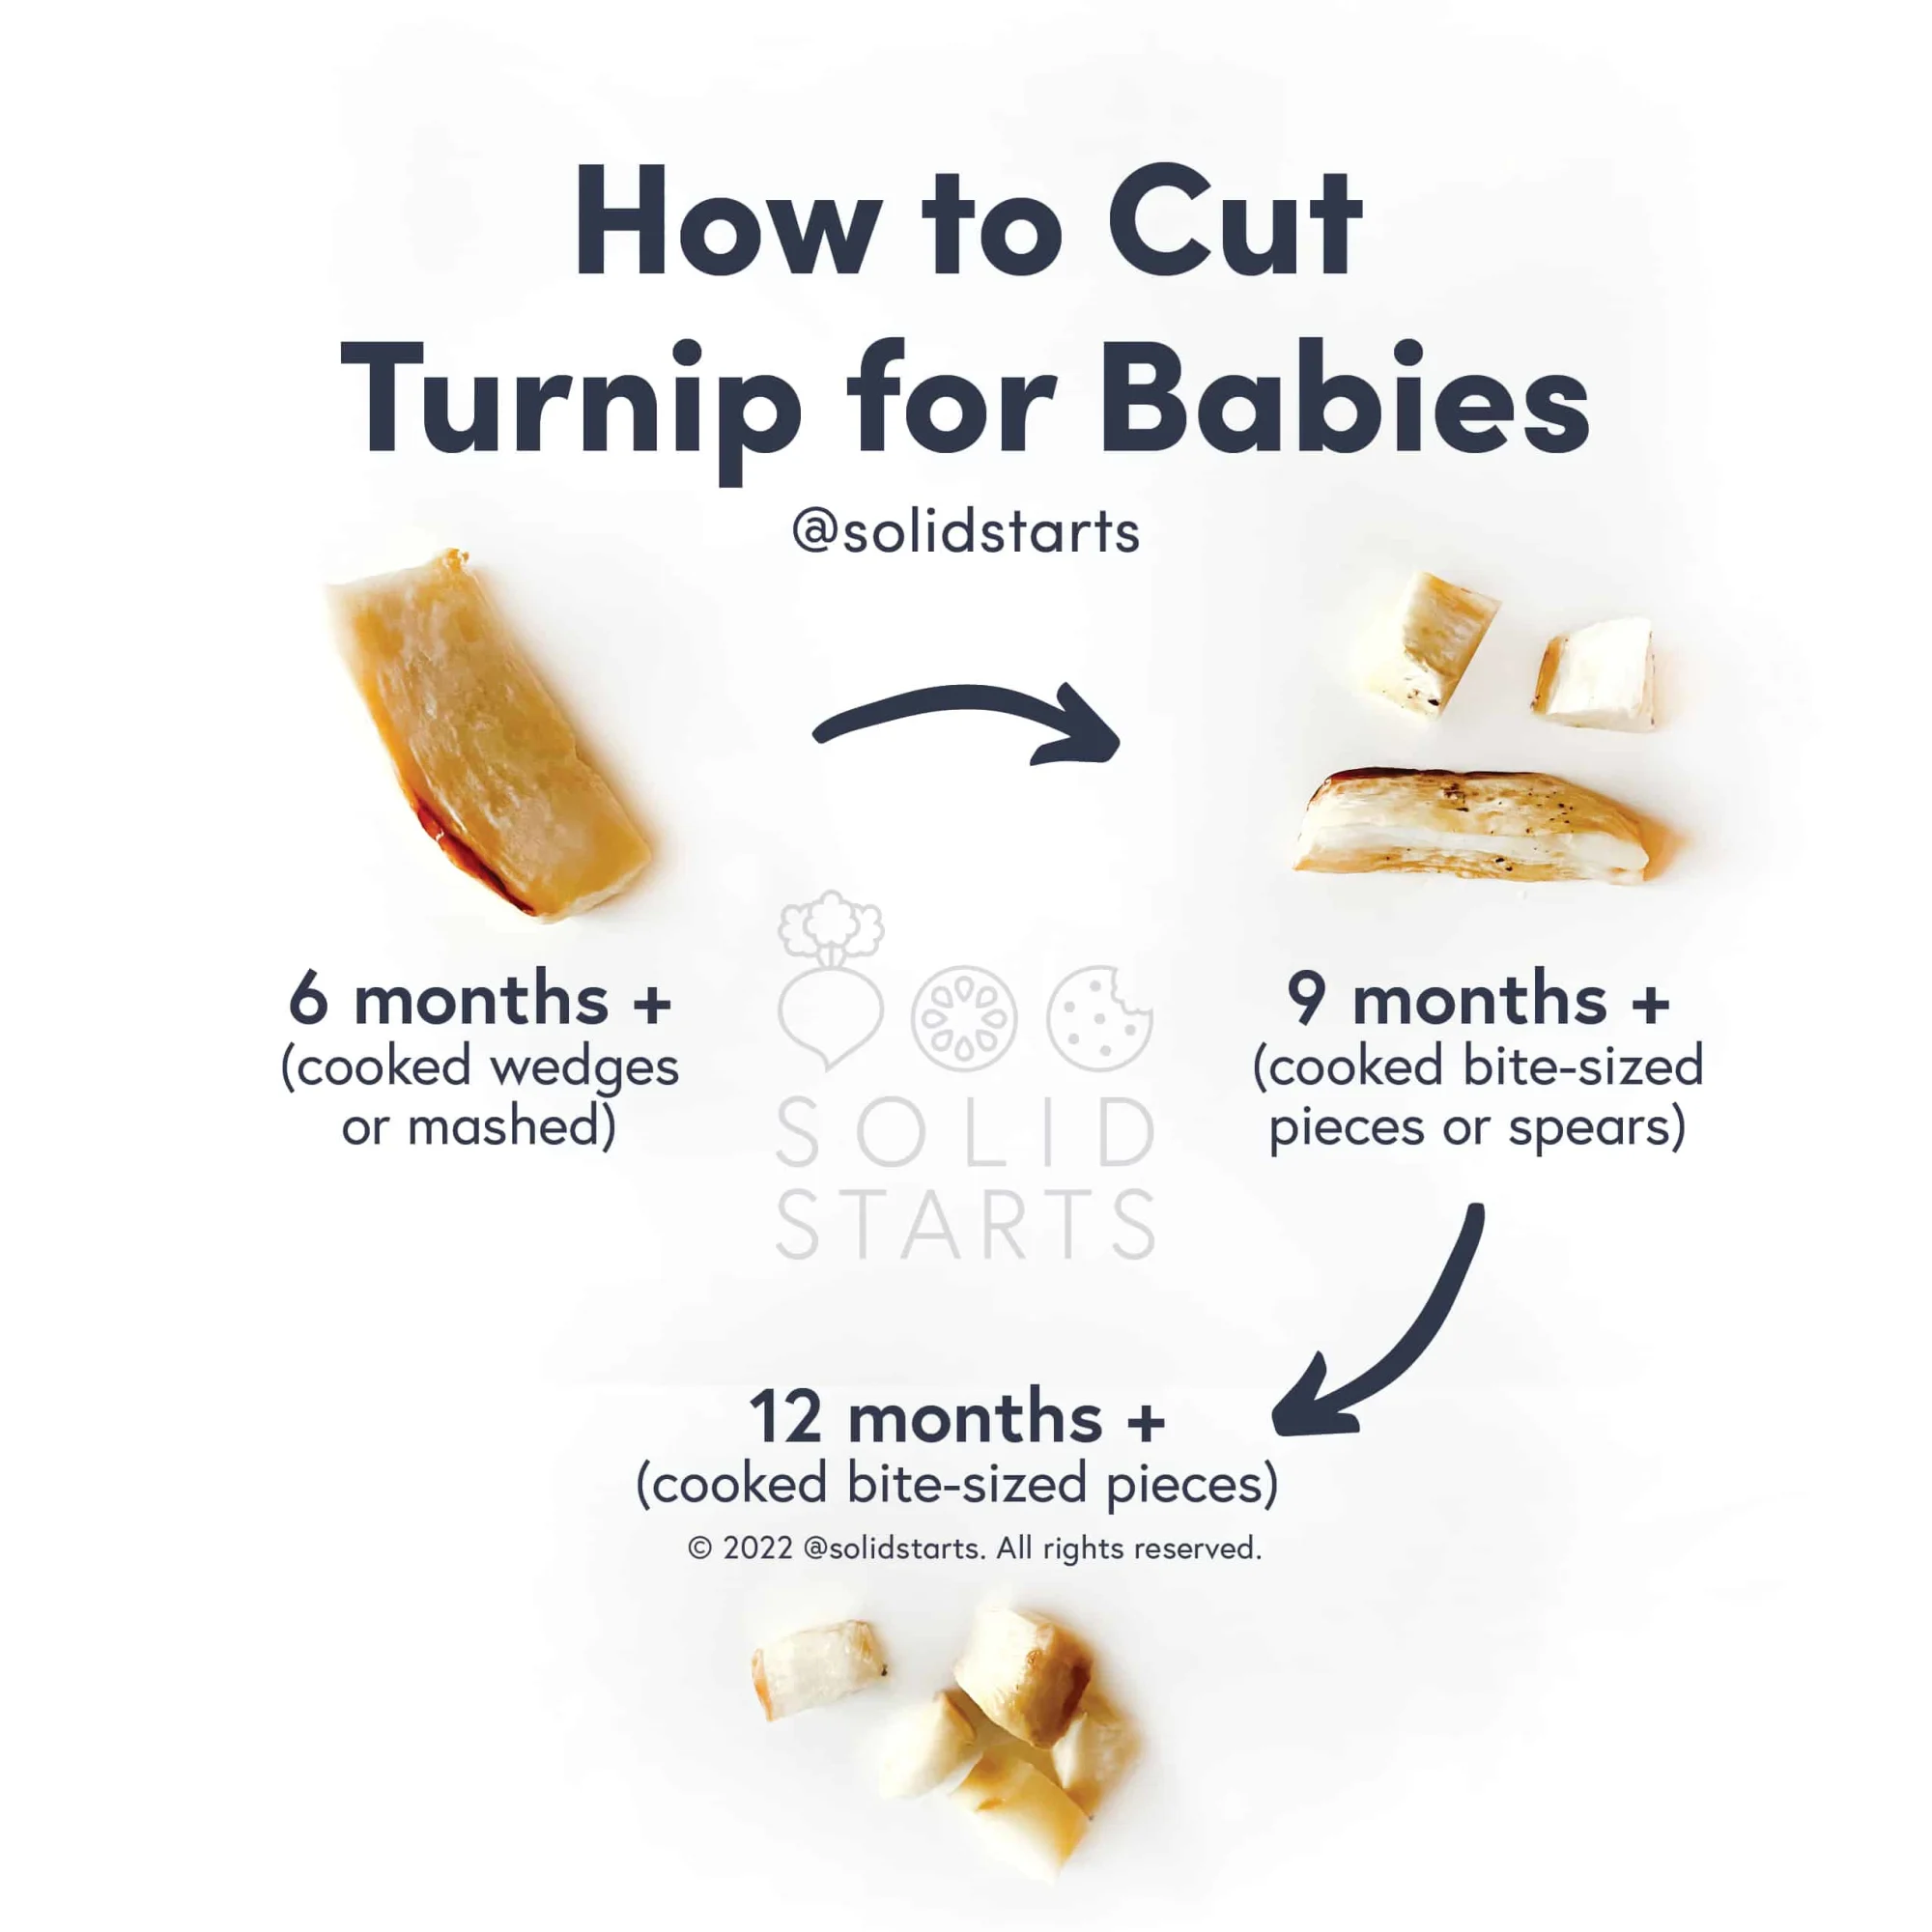 a Solid Starts infographic with the header "How to Cut Turnip for Babies": peeled, cooked wedges for 6 months+, cooked, peeled, bite-sized pieces or spears for 9 months+, and cooked bite-sized pieces for 12 months+